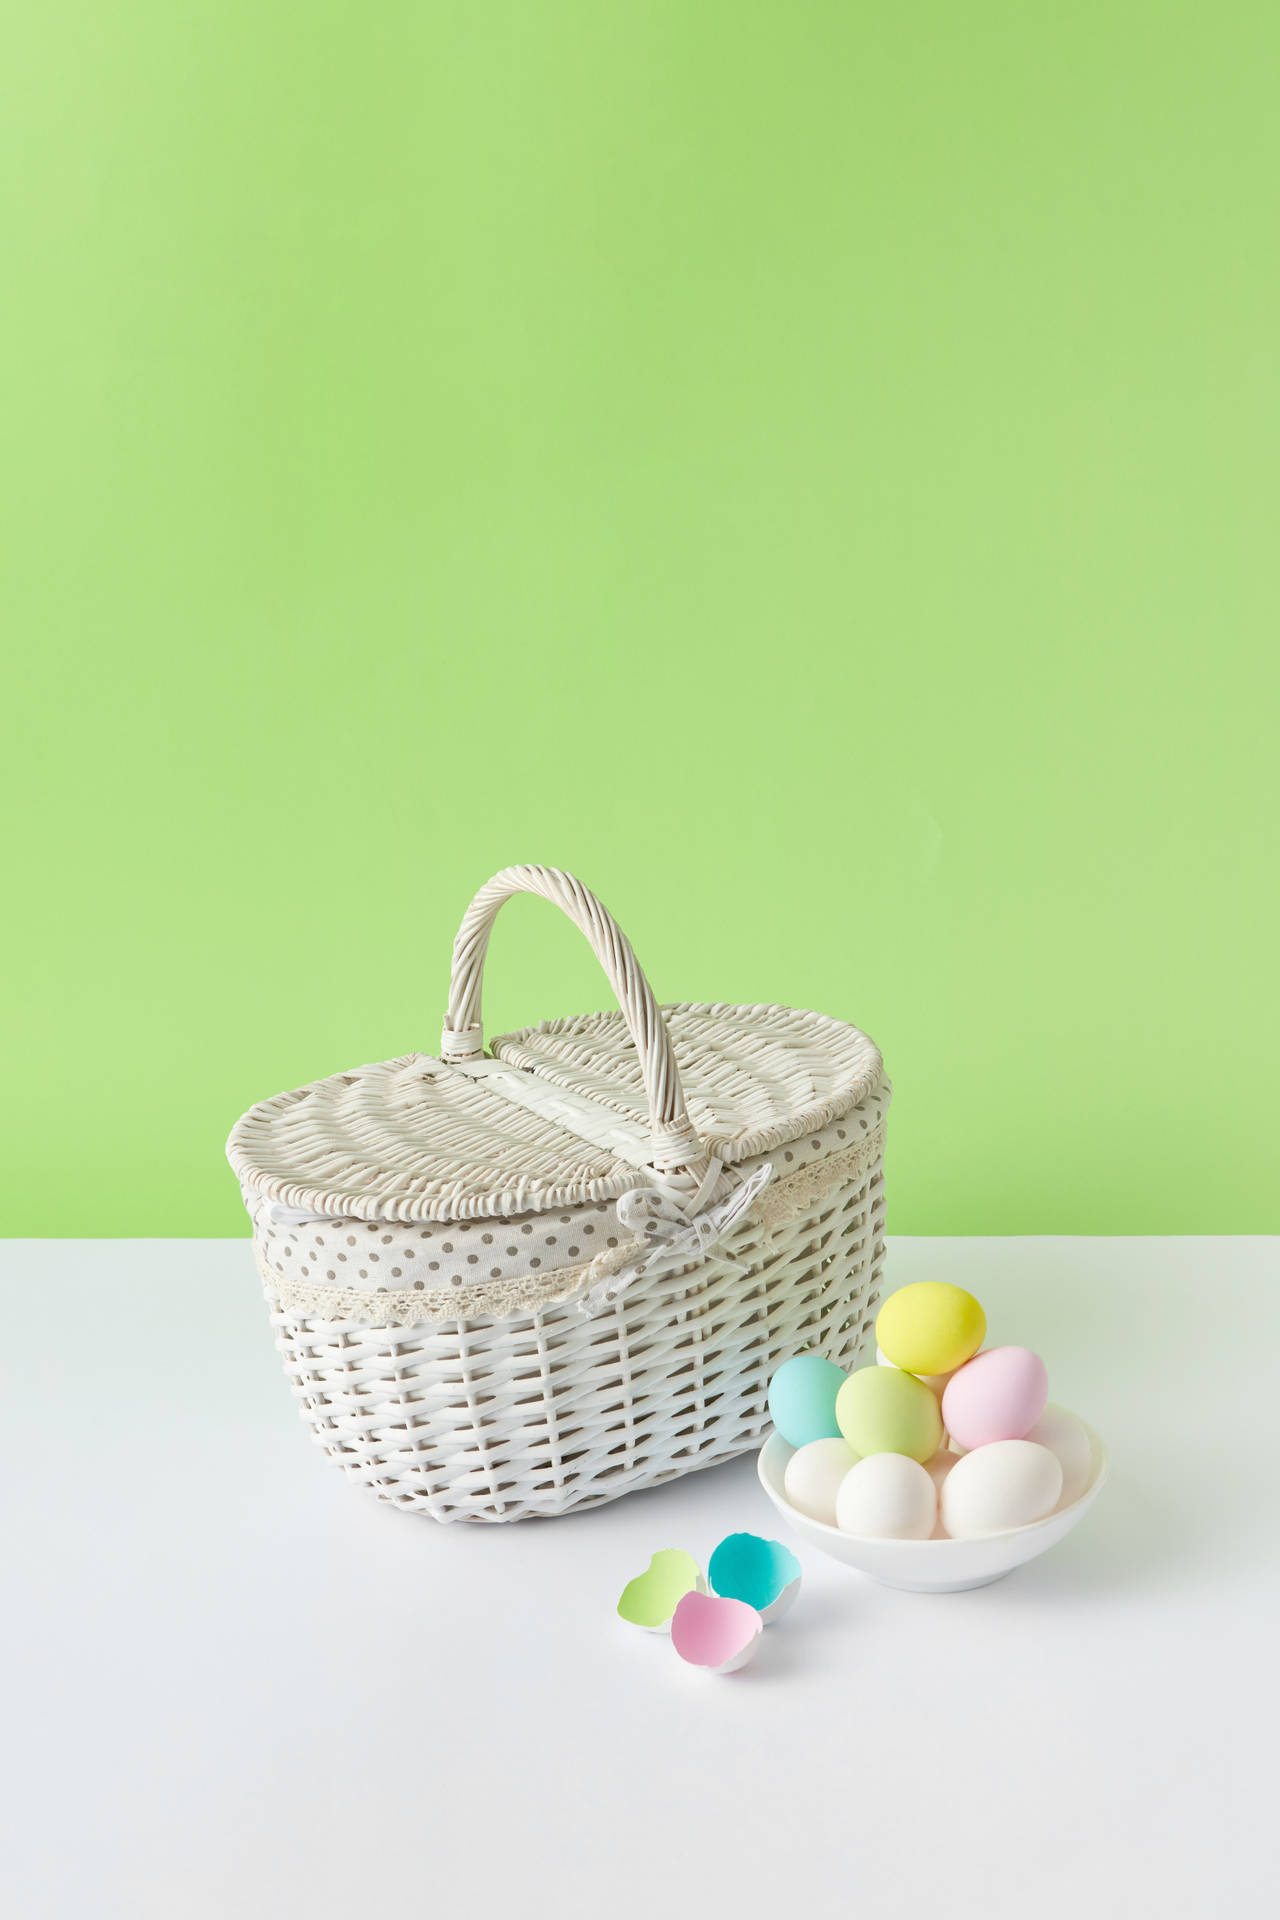 Basket And Eggs In Cute Pastel Aesthetic Background